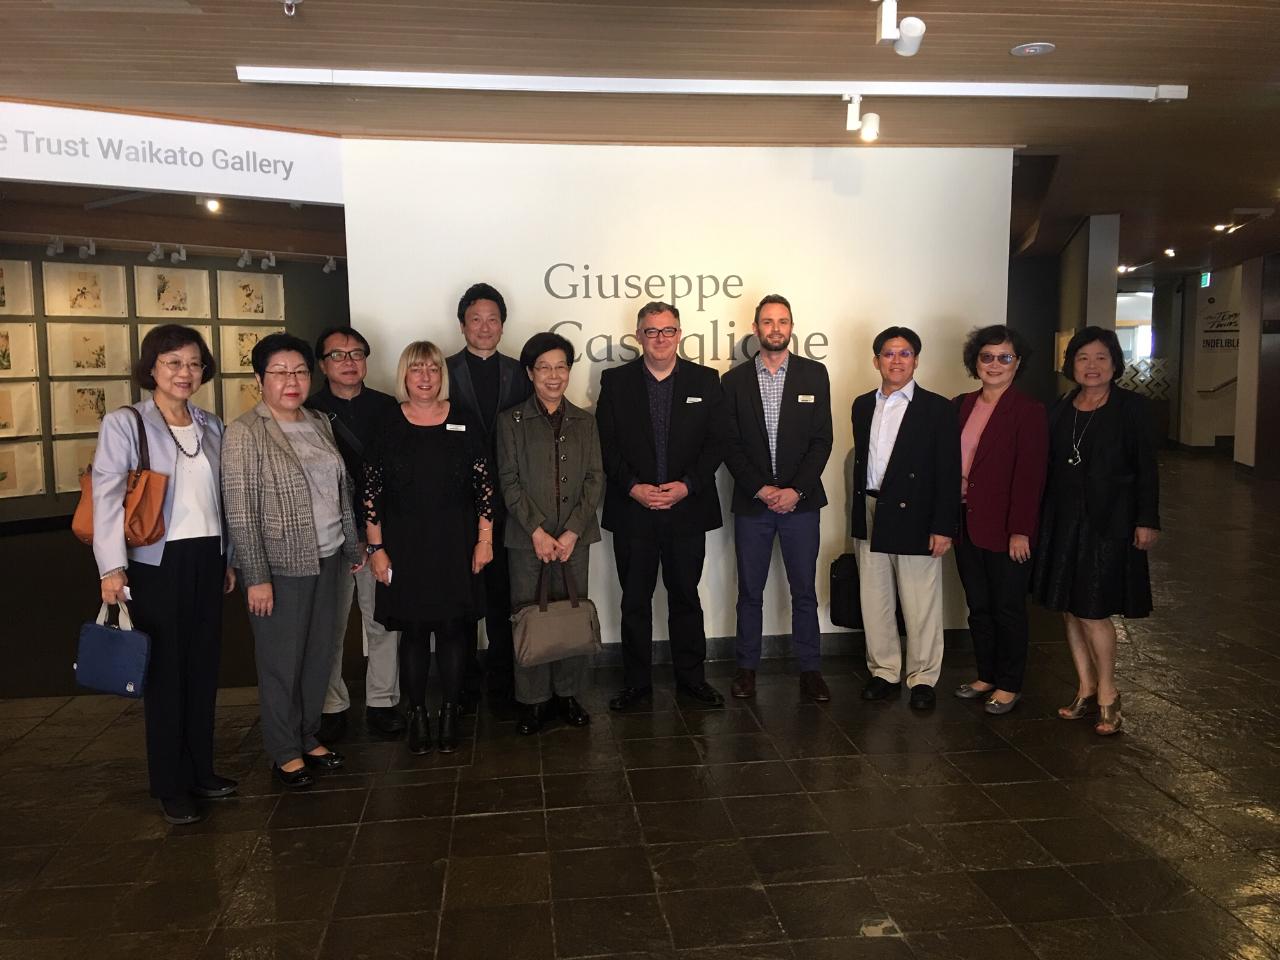 Dr.CHOU and delegation from the R.O.C. Control Yuan taking picture with Director of Waikato Museum, Ms.Cherie Meecham, Collections and Exhibitions Manager,Mr. Steve Chappell and Partnerships and Communications Manager, Mr.Dan Silverton in front of the exhibition of Gipseppe Castiglione's Paintings.